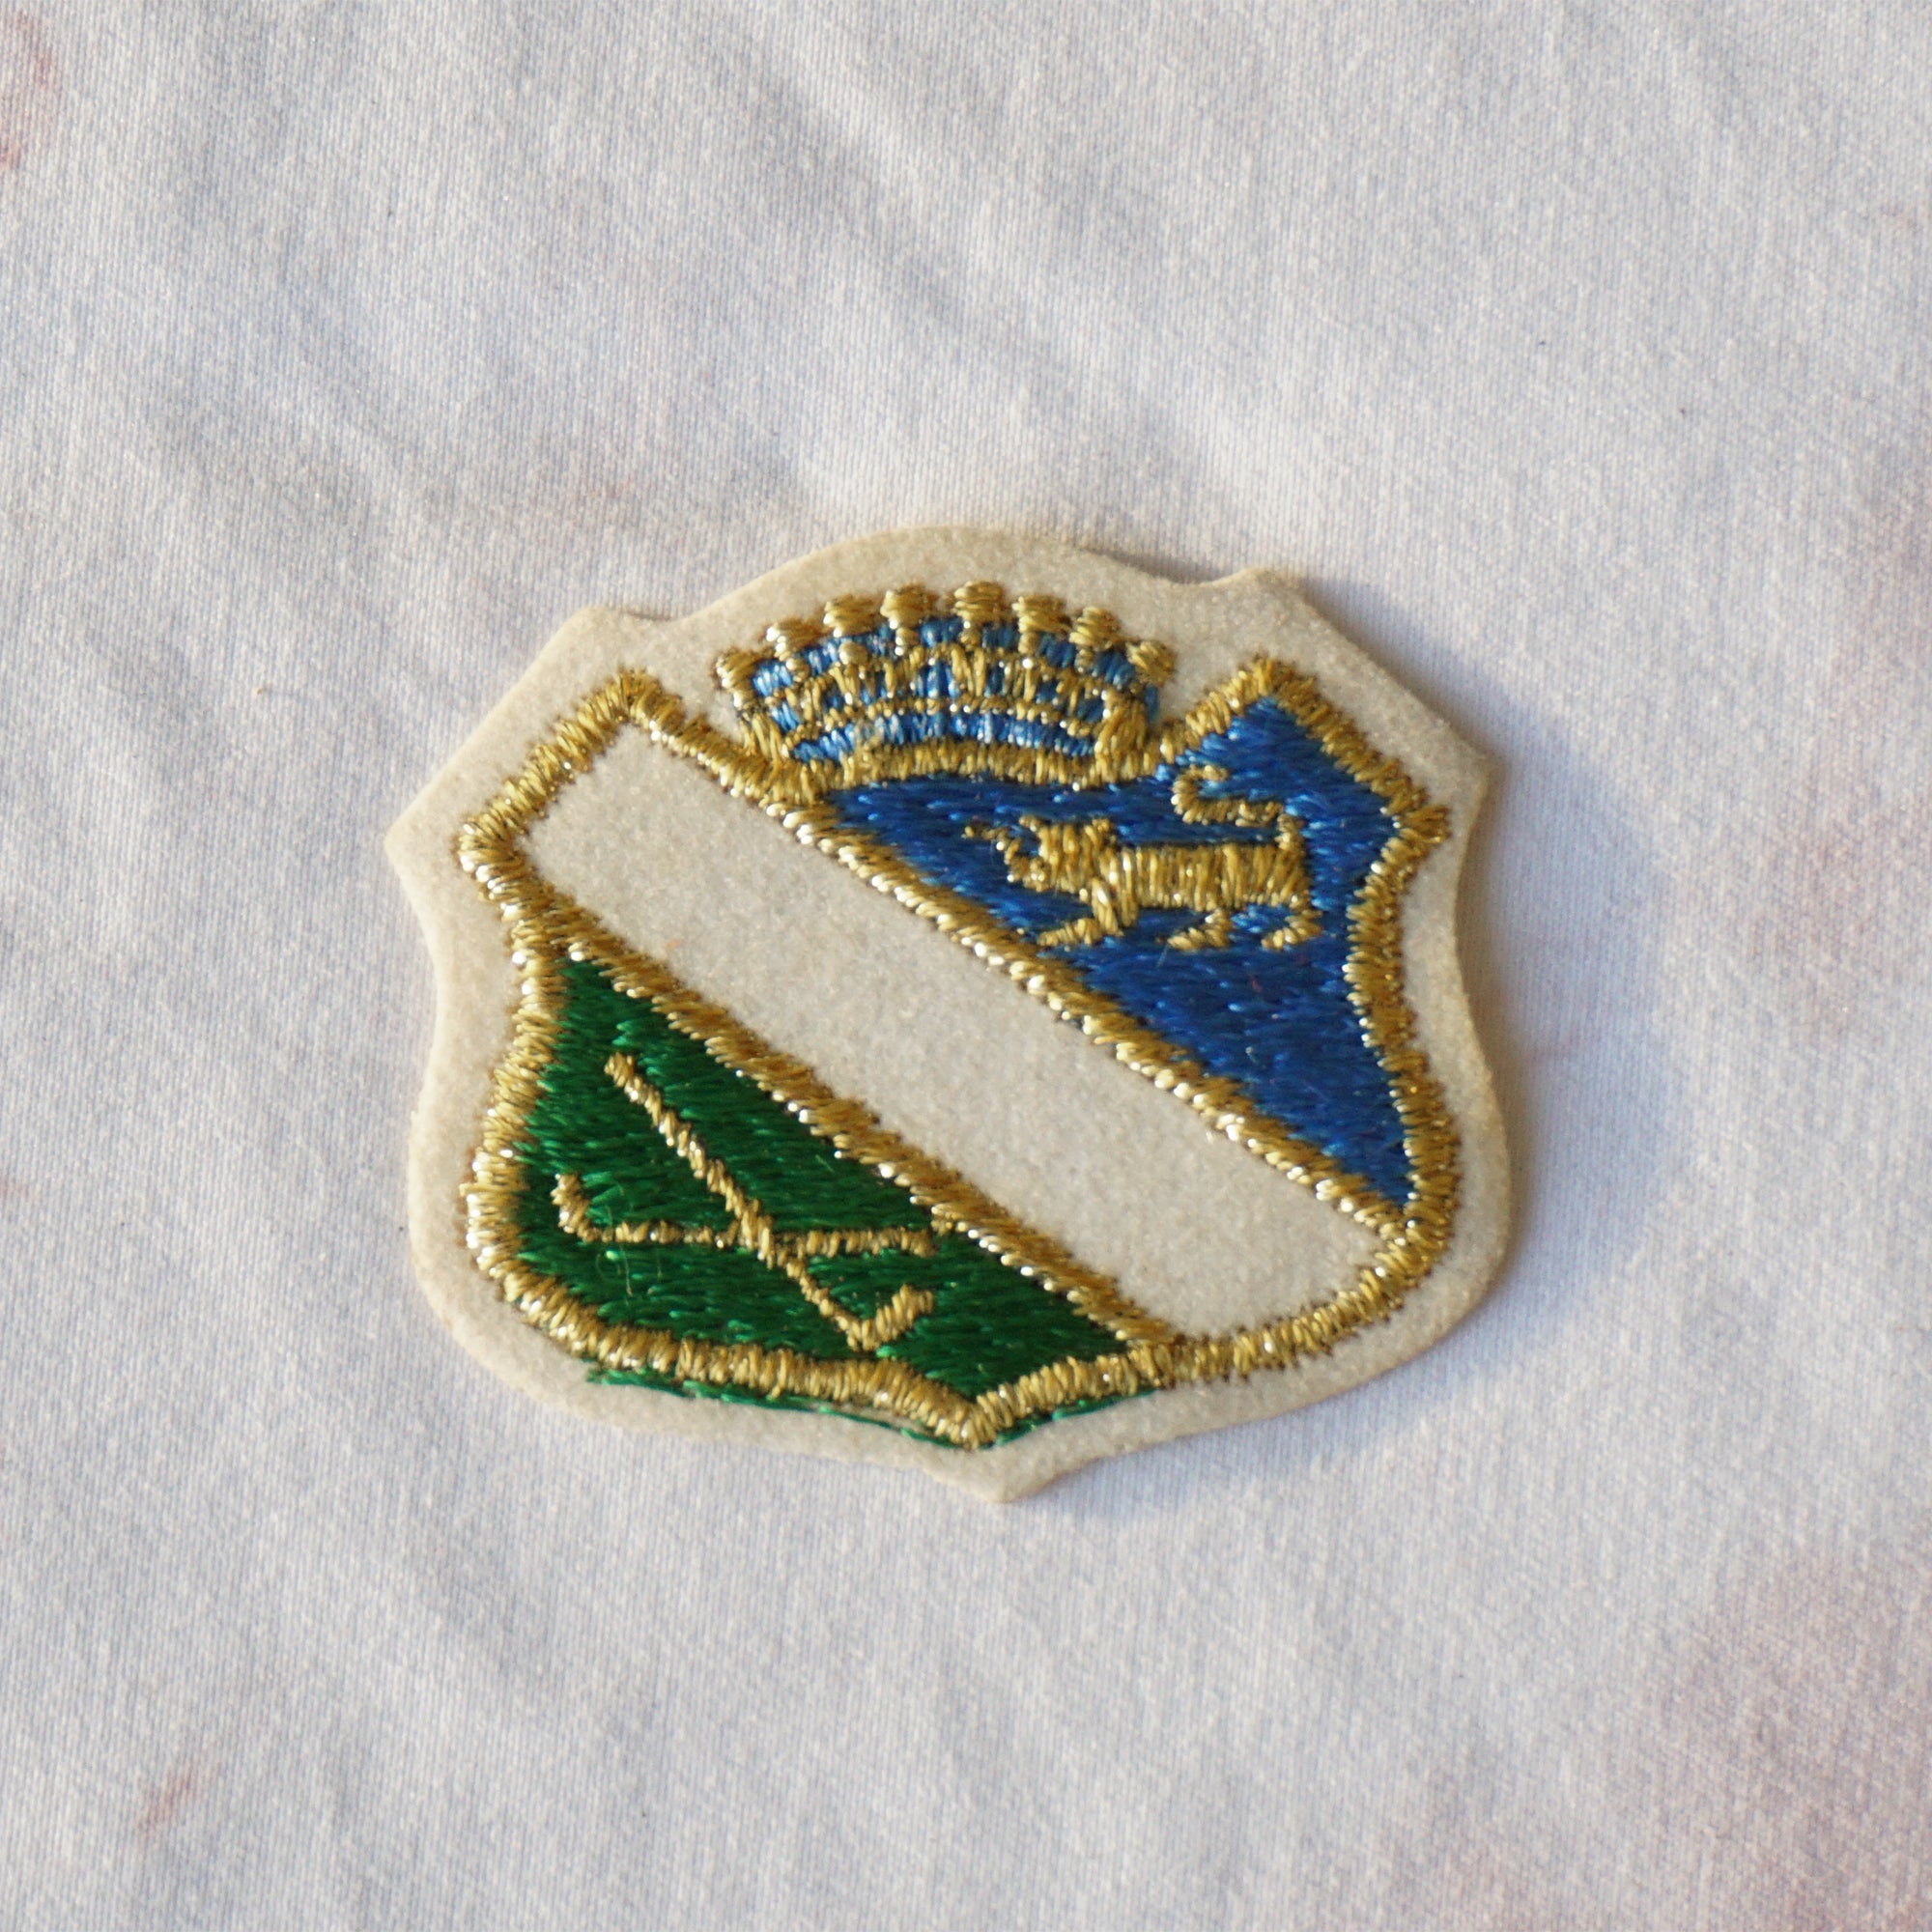 1980s Vintage 2.25" Golf Tiger Crown Emblem Clothing Patch. Gold, Blue and Green Colors.